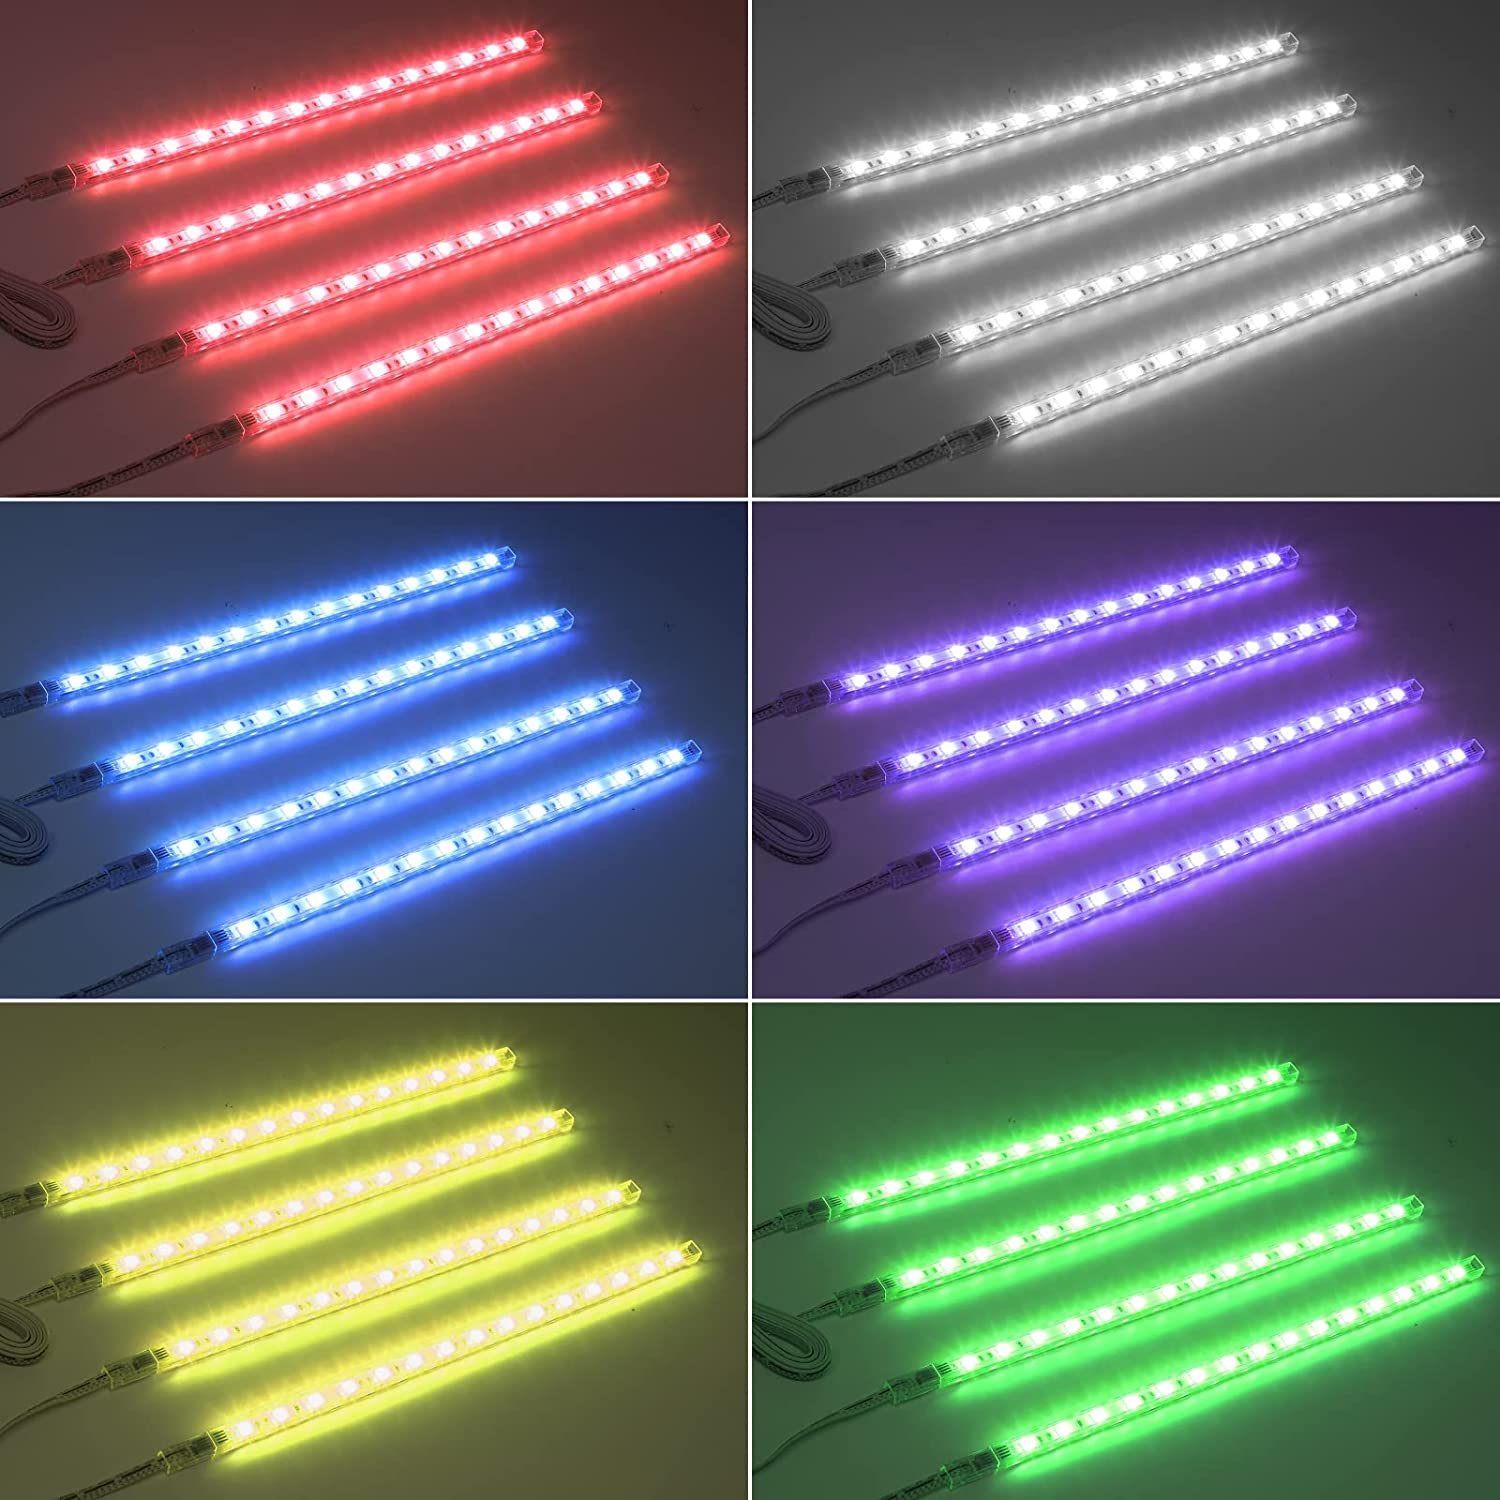 LED Display Light Bar Kit - (4) 16inches Plug-in Linkable Strip Lights for  Large Display Cabinet - Series + Parallel Connection - White 6000K